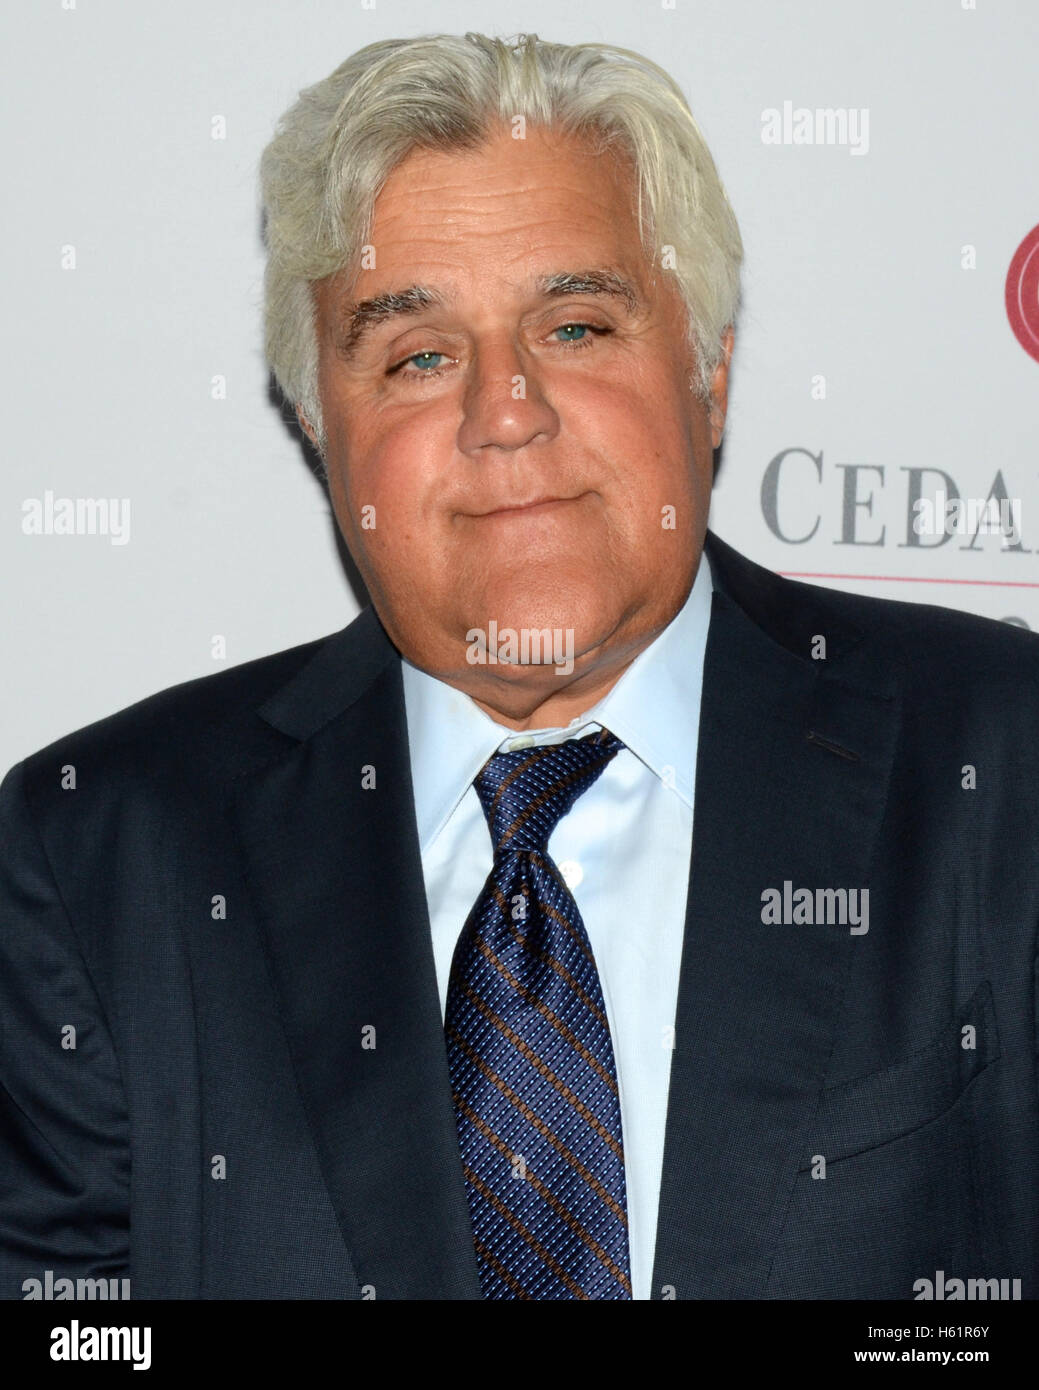 Jay Leno attends the 2015 Cedars-Sinai Annual Board of Governors Gala at the Beverly Hilton Hotel in Beverly Hills California. Stock Photo